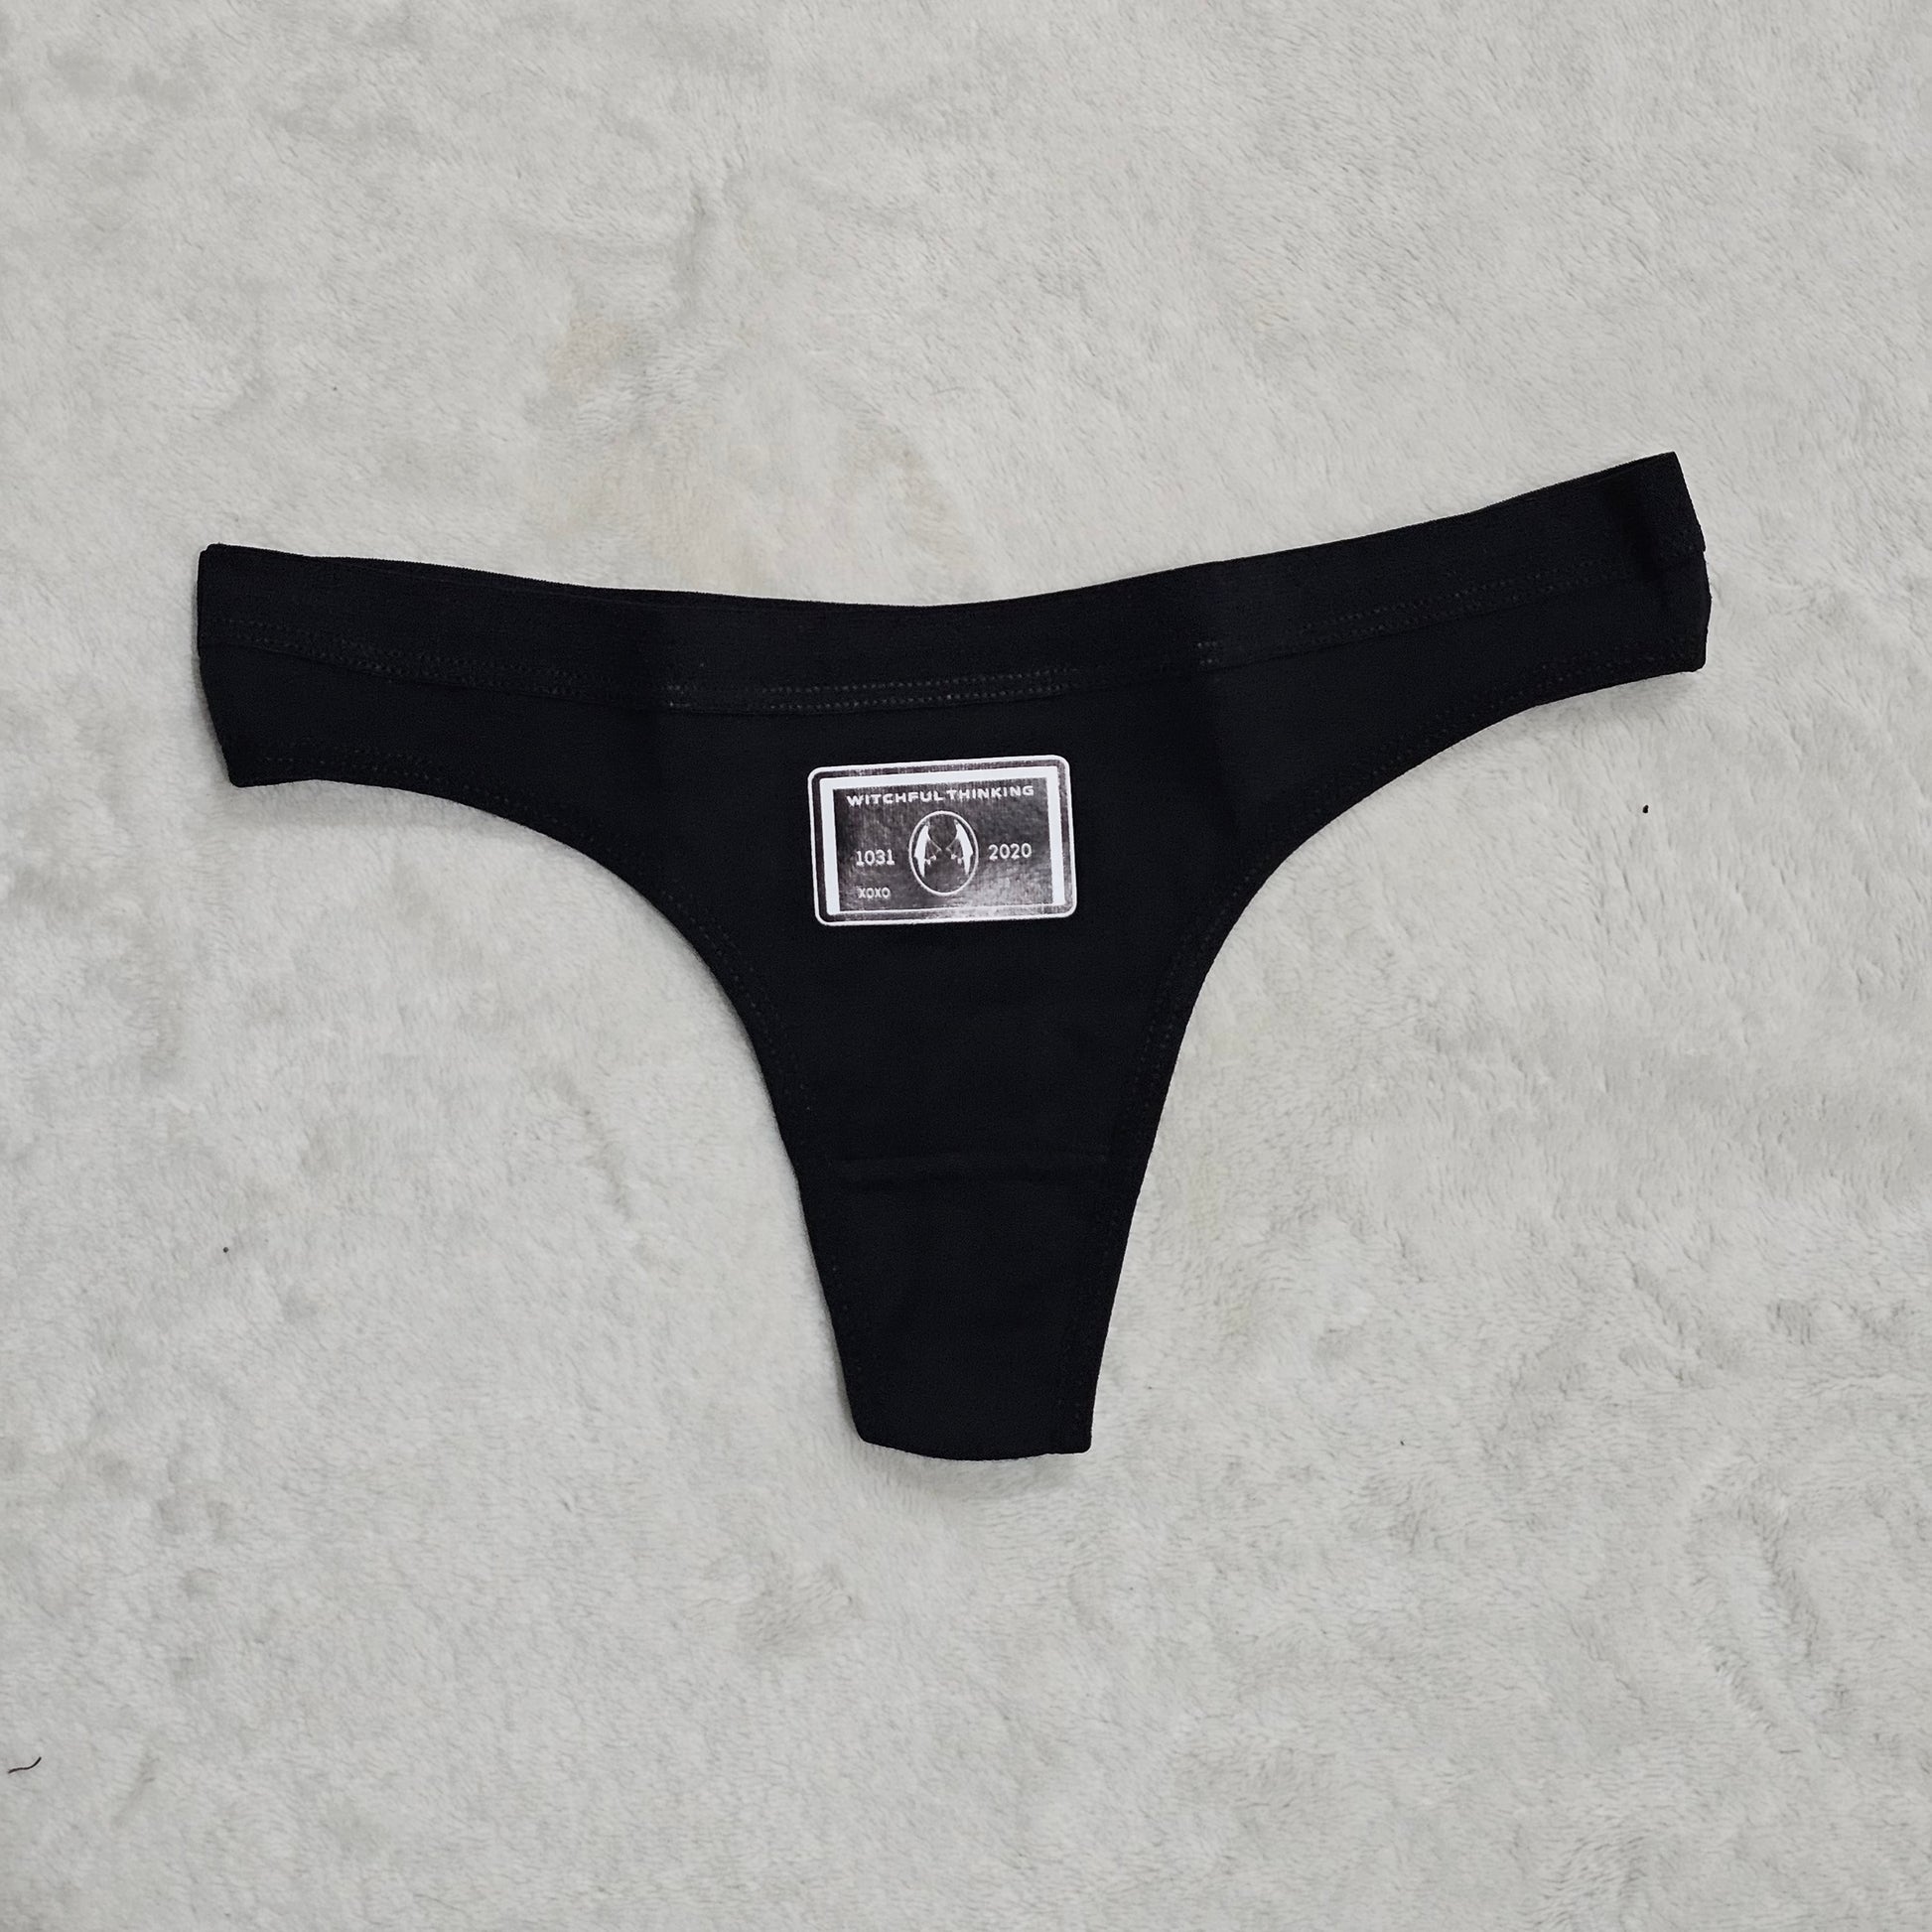 Witchcraft Panty | Soft Black Cotton Thong WITCHFUL THINKING Graphic - MaryJaneNite - Panties